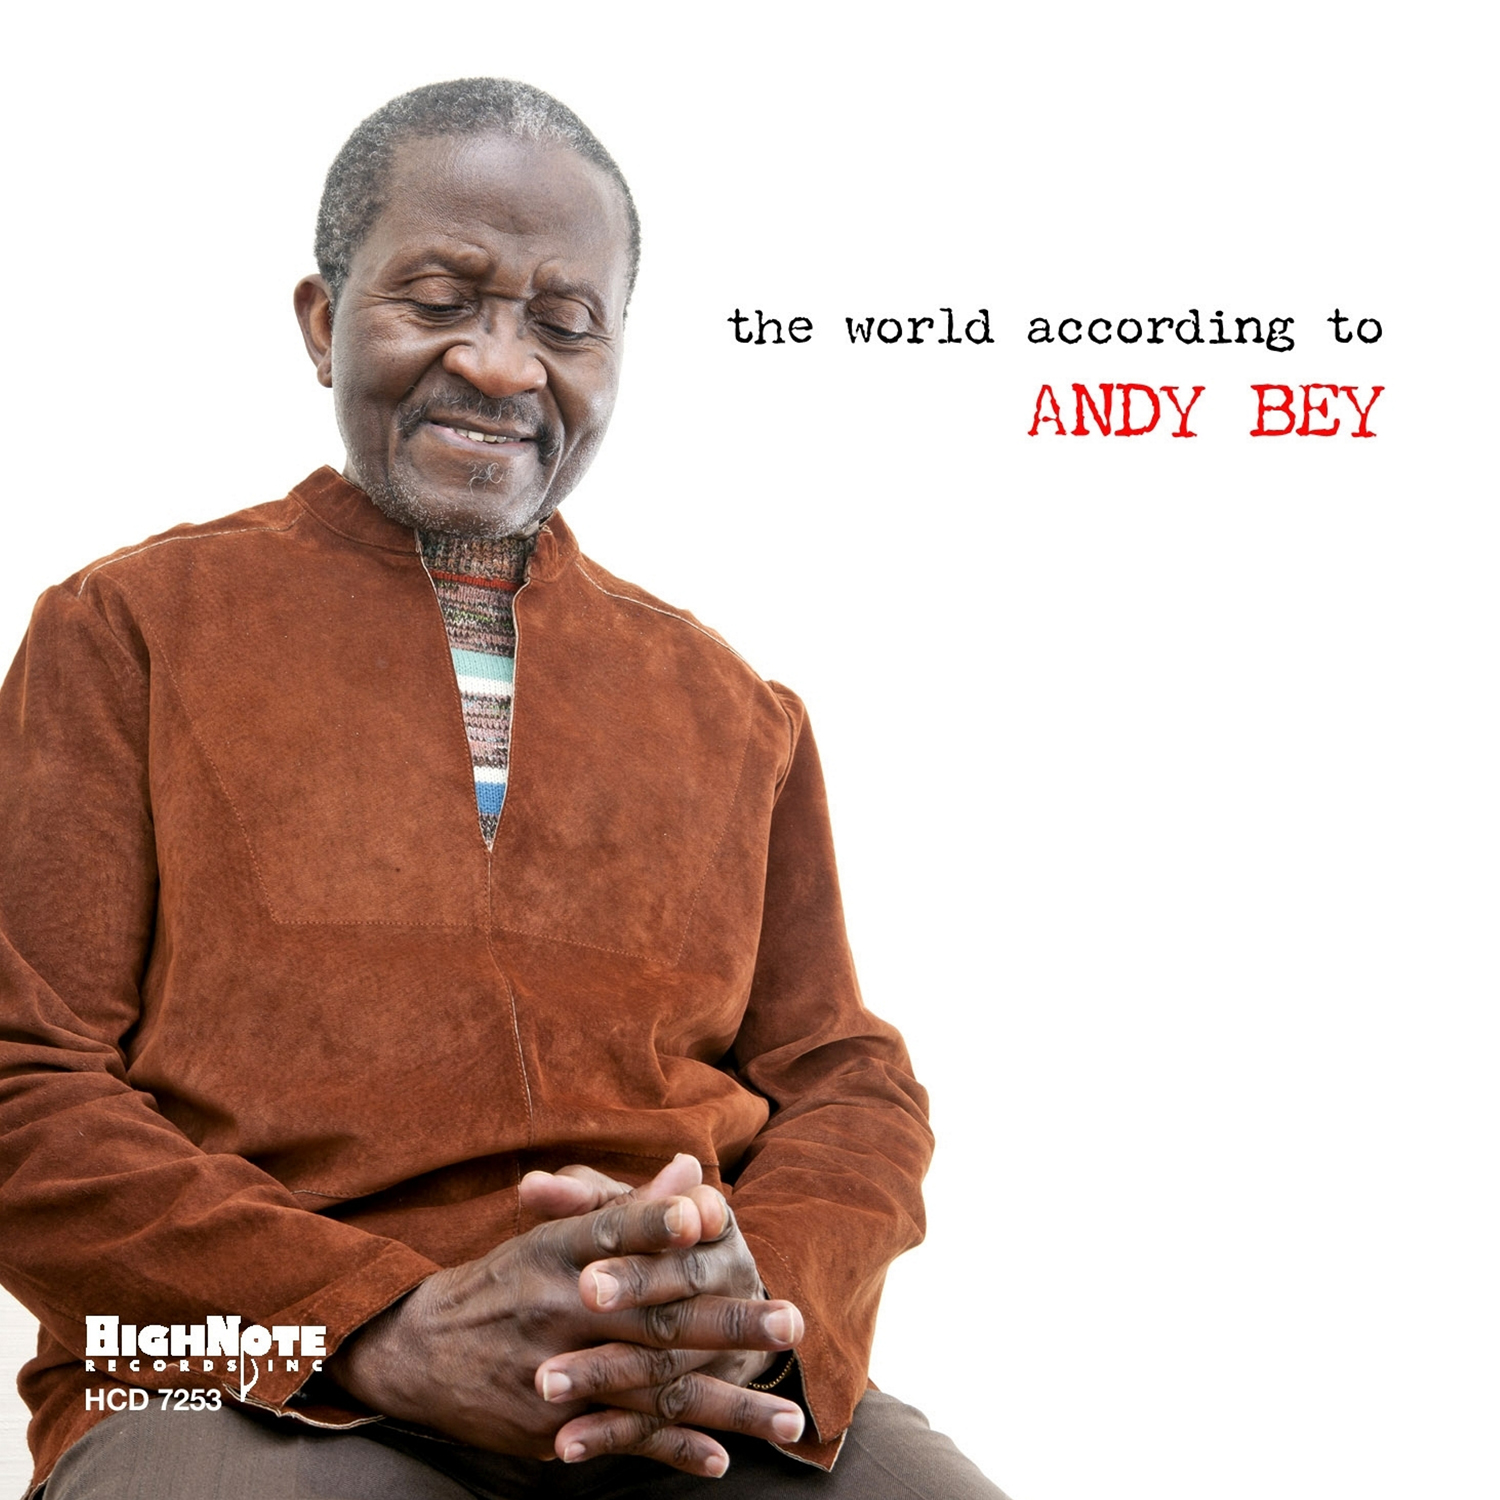 THE WORLD ACCORDING TO ANDY BEY